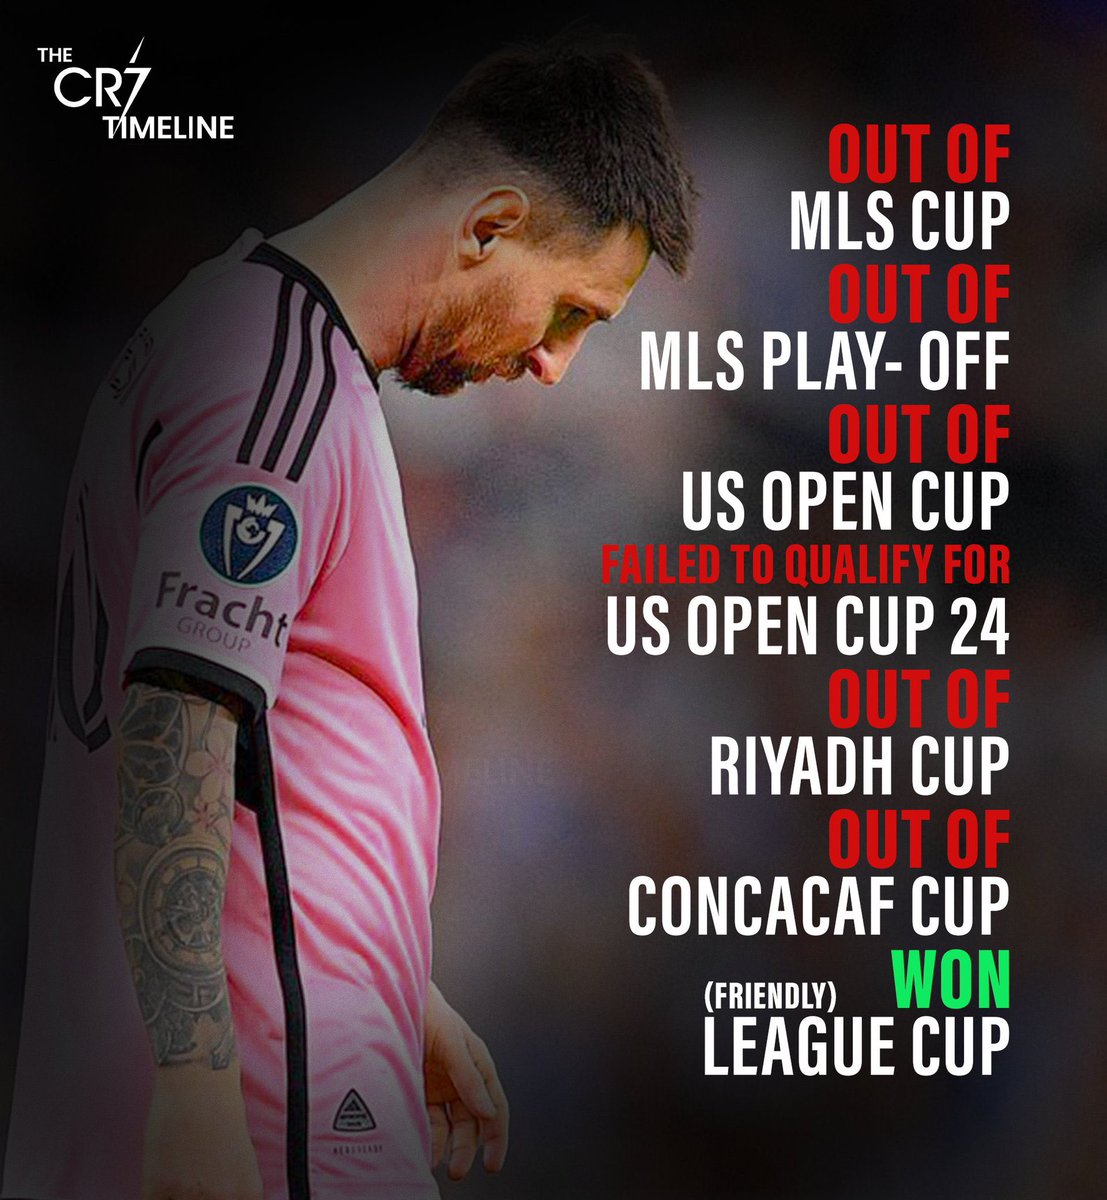 🚨 Lionel Messi with Inter Miami: ❌ Lost MLS 2023. ❌ Lost US open cup. ❌ Lost MLS playoff qualification. ❌ Lost Riyadh season cup. ❌ Lost CONACAF Champions Cup. 😭 1 GOAL in MLS 2023. ✅ Won League cup (Friendly). Worst signing of all-time?